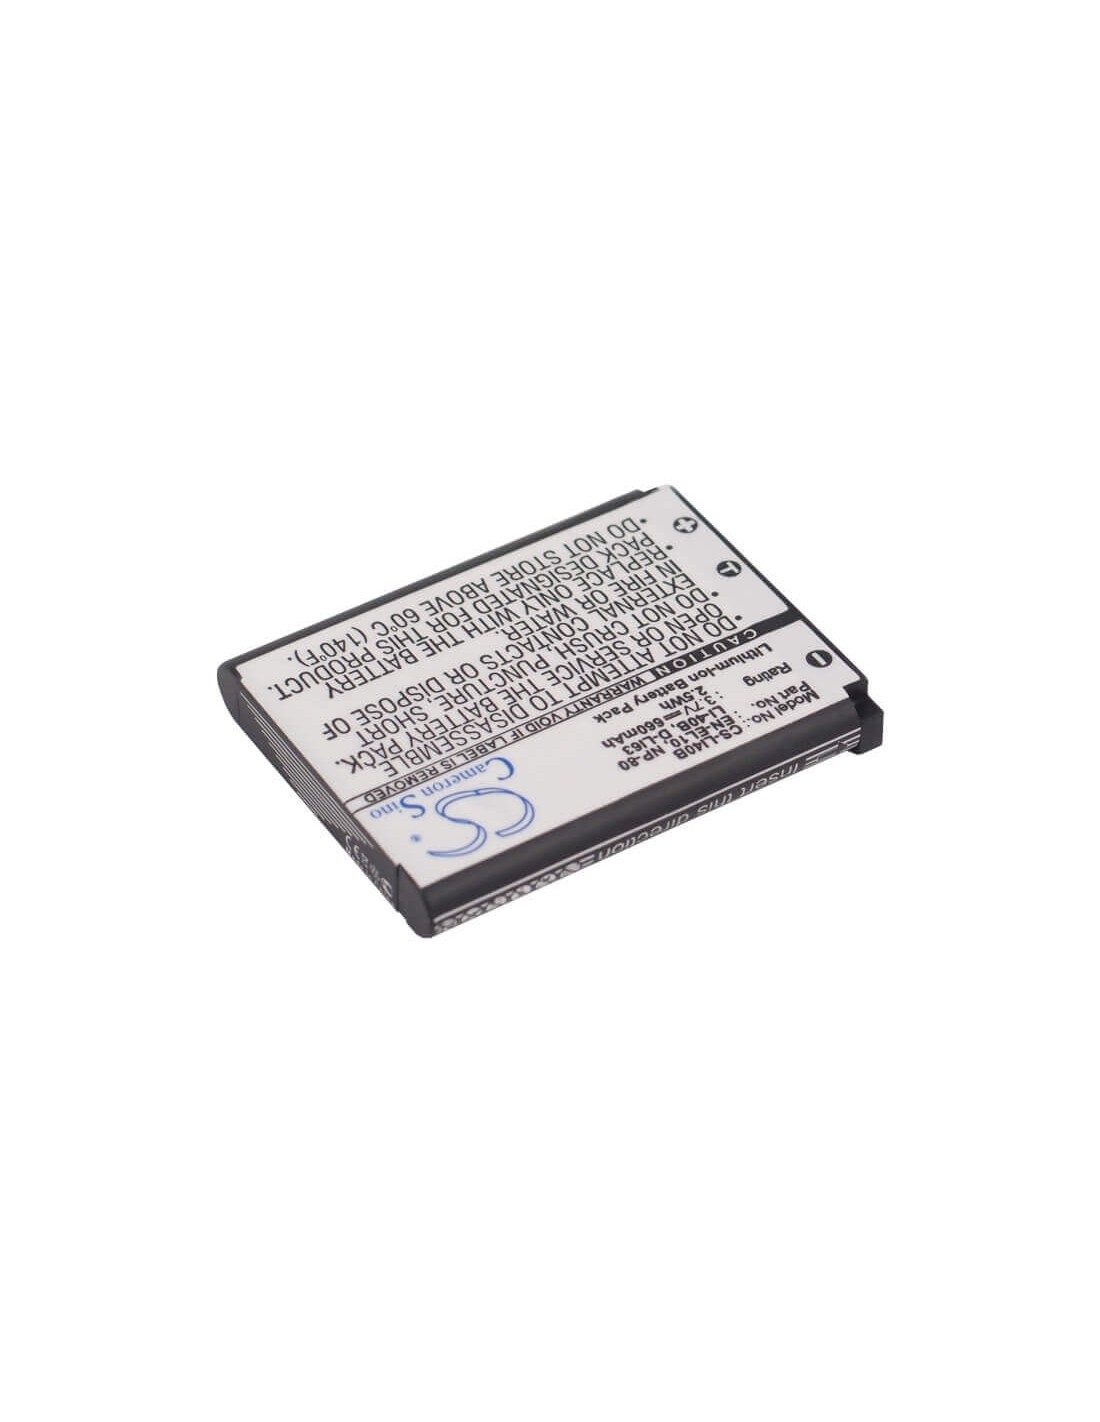 Battery for Olympus Ir-300, Sp-700, Tg-310, Vr-310, 3.7V, 660mAh - 2.44Wh